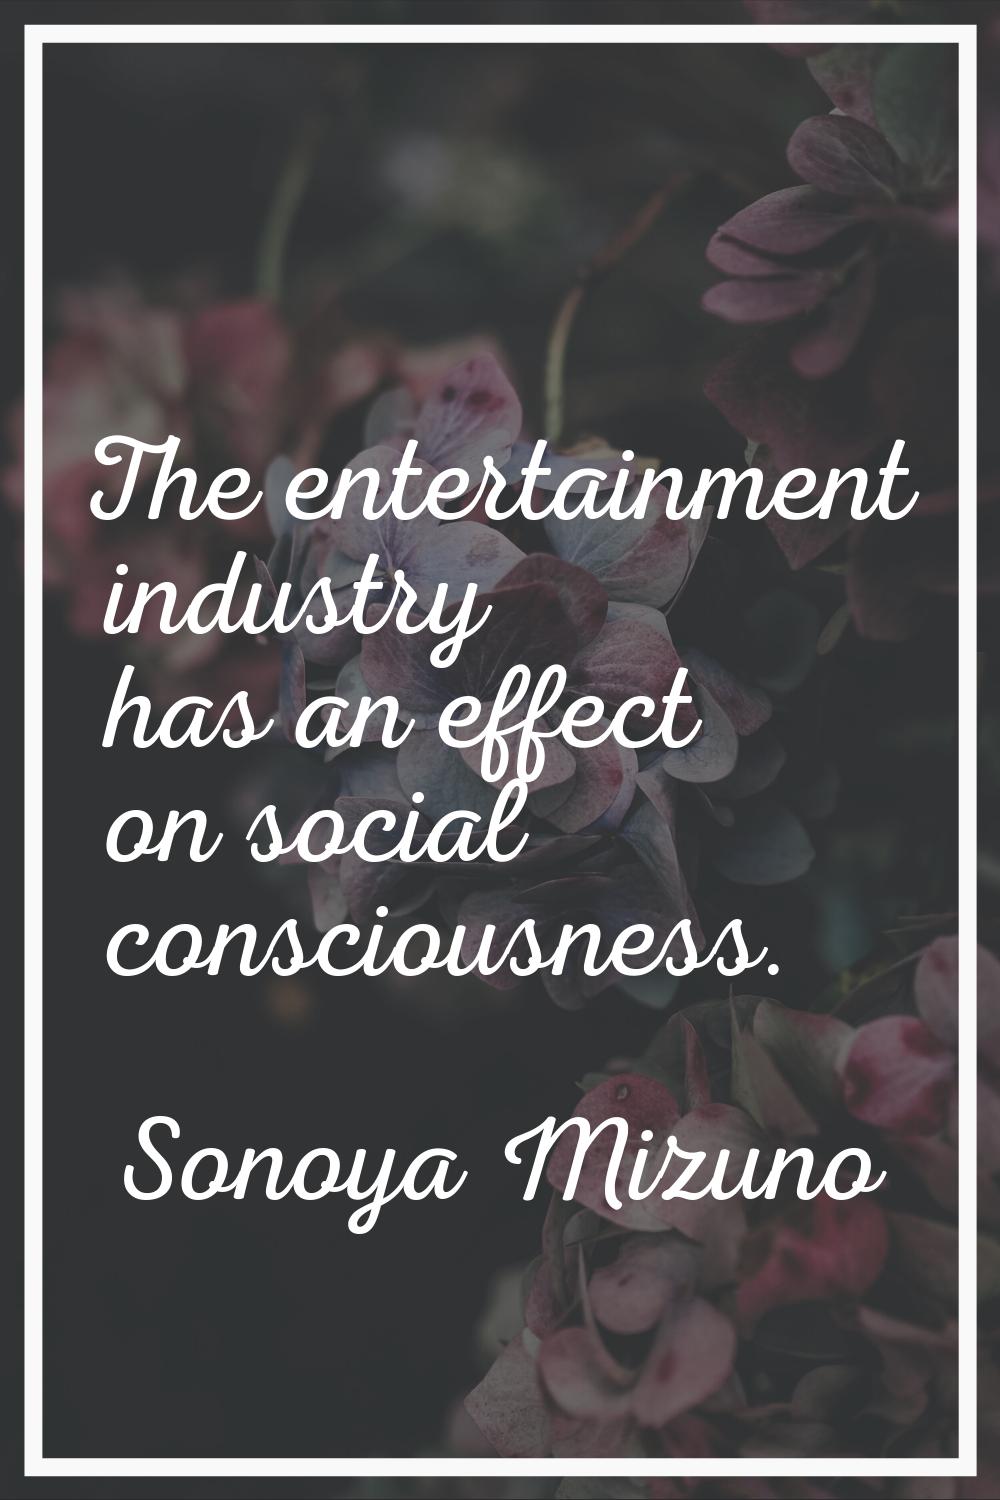 The entertainment industry has an effect on social consciousness.